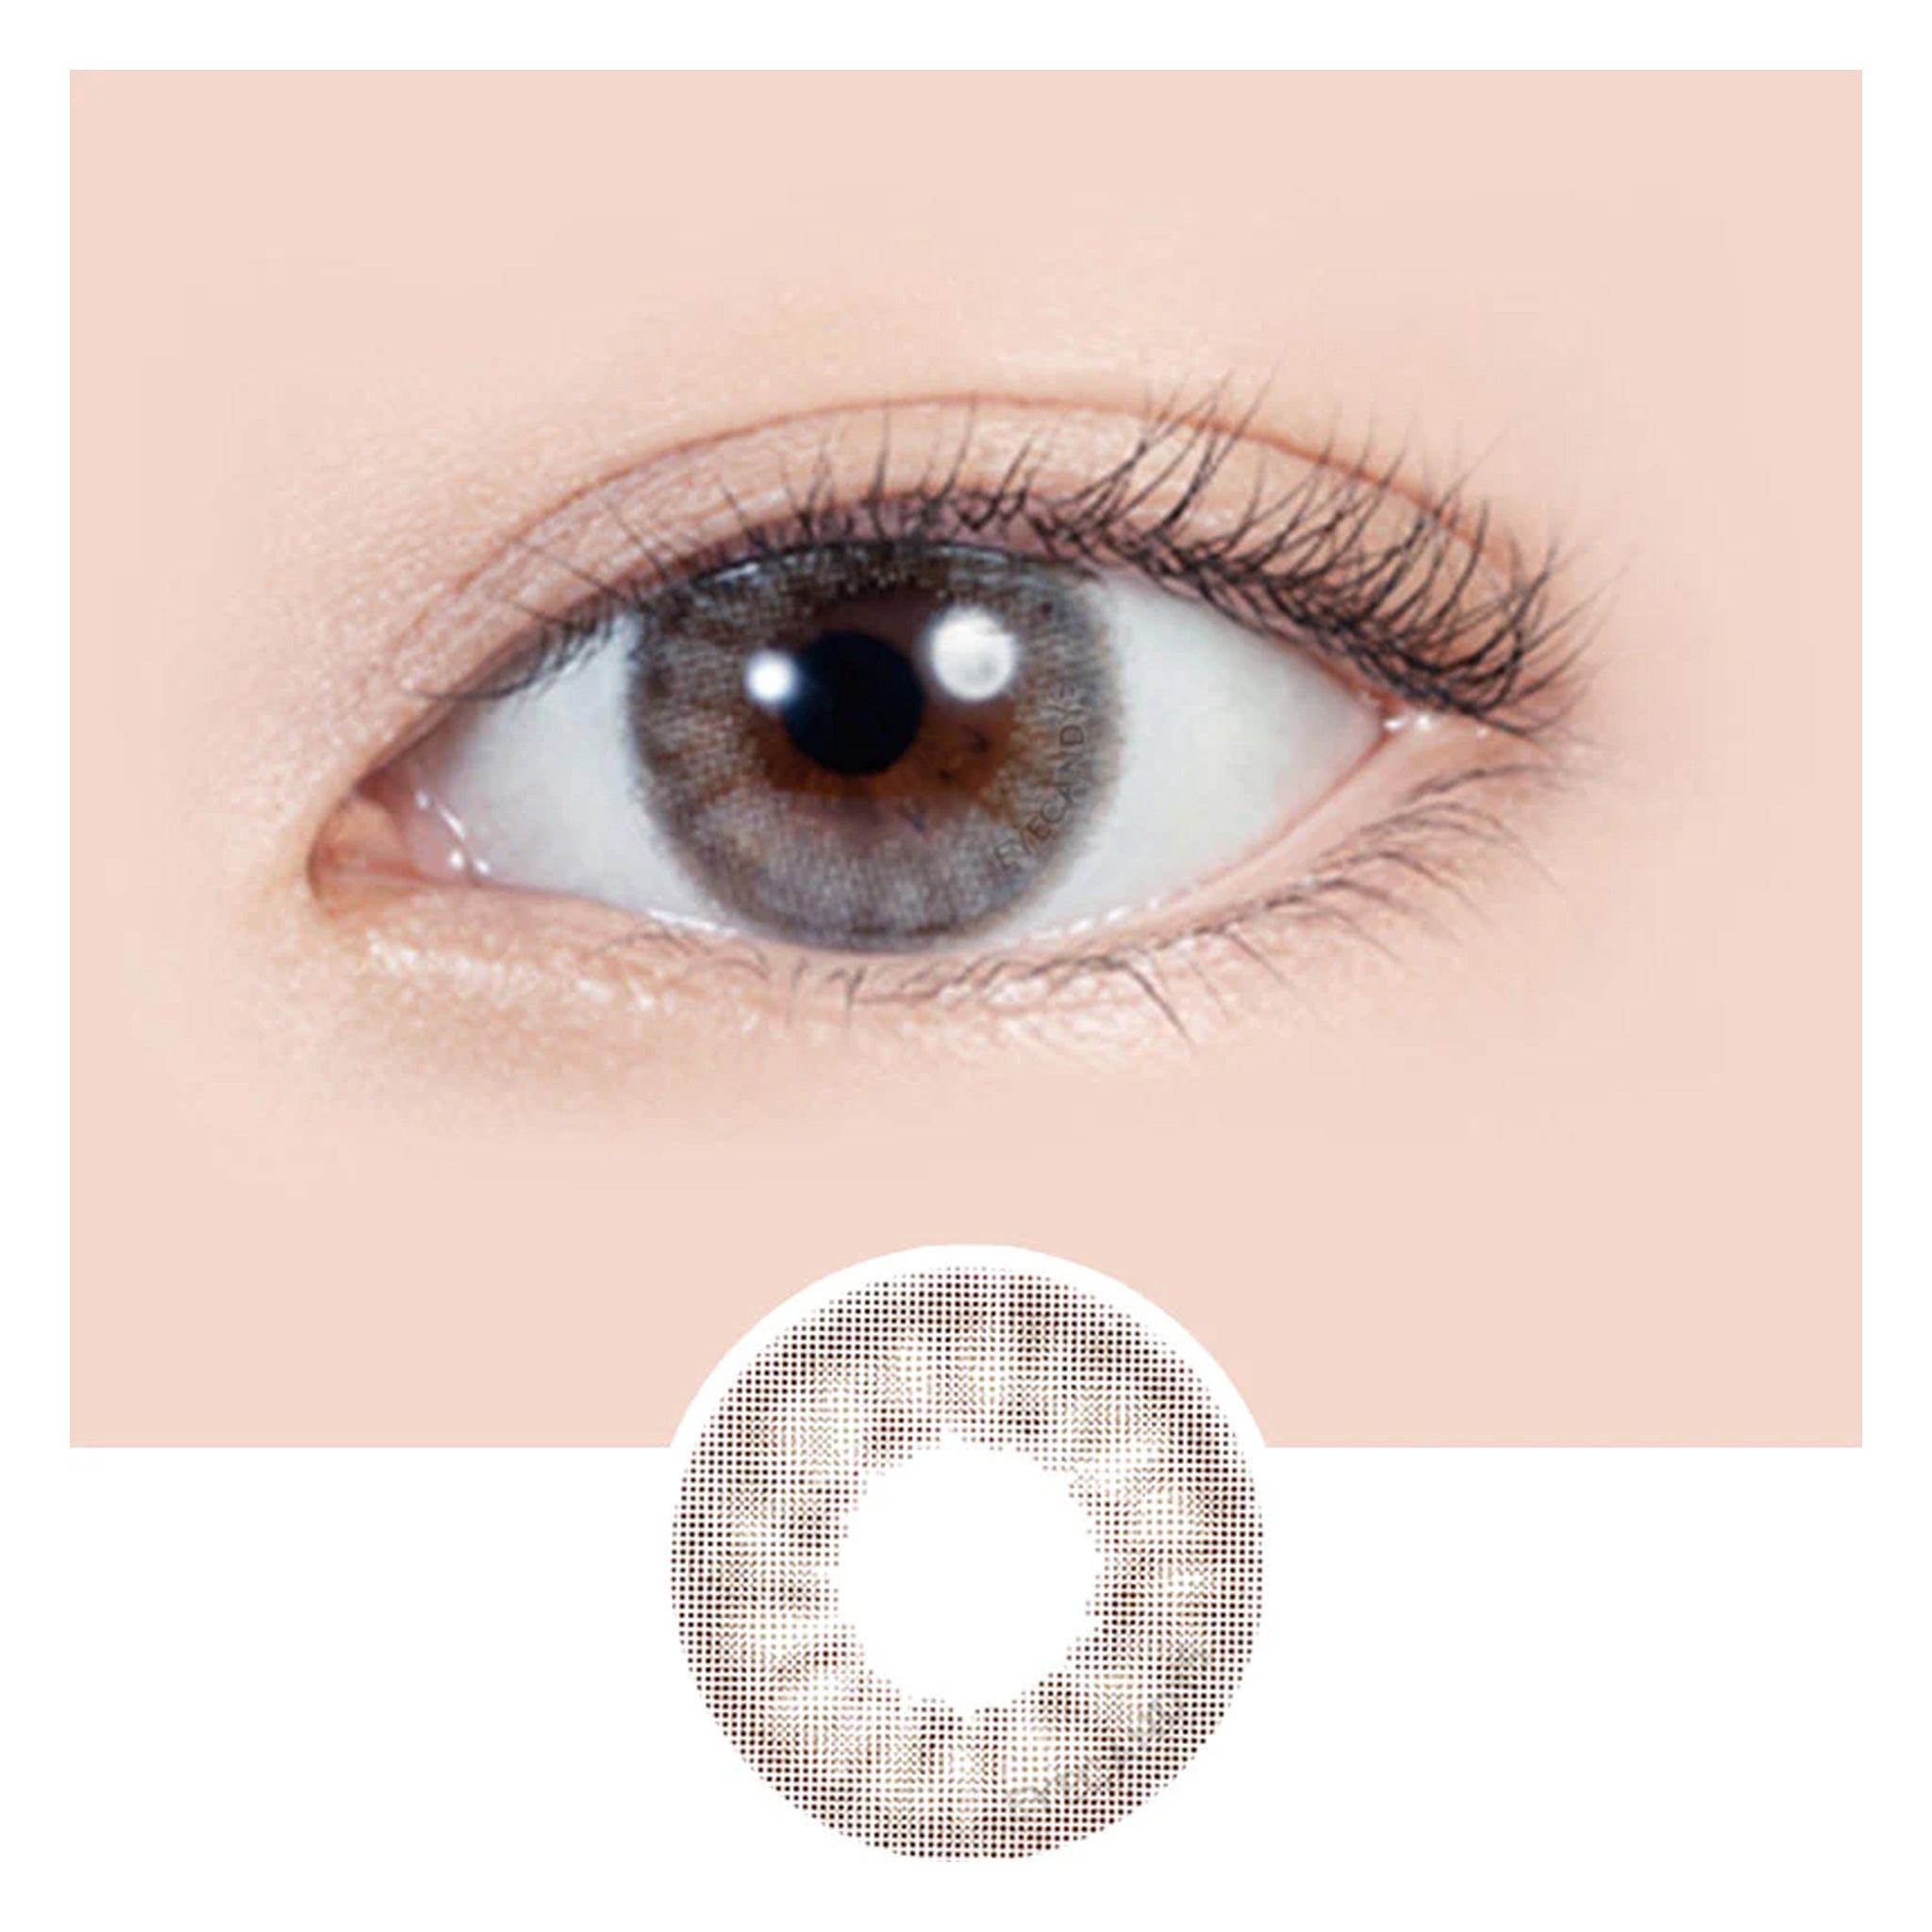 LIL MOON 1Day Contact Lenses-Smokey Beige 10pcs